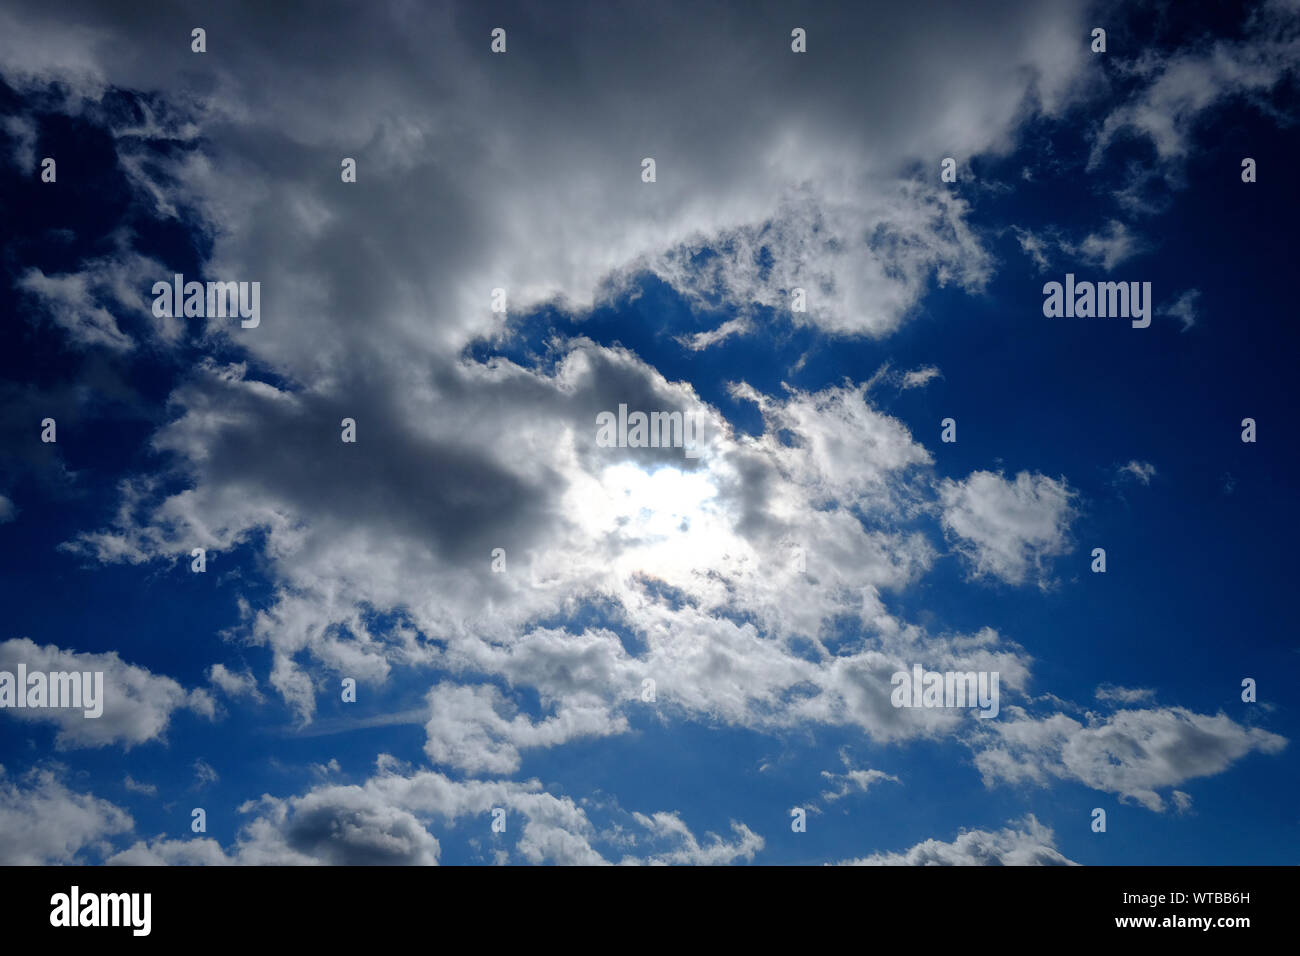 dramatic cloudy blue sky, sun behind clouds, norfolk, england Stock Photo